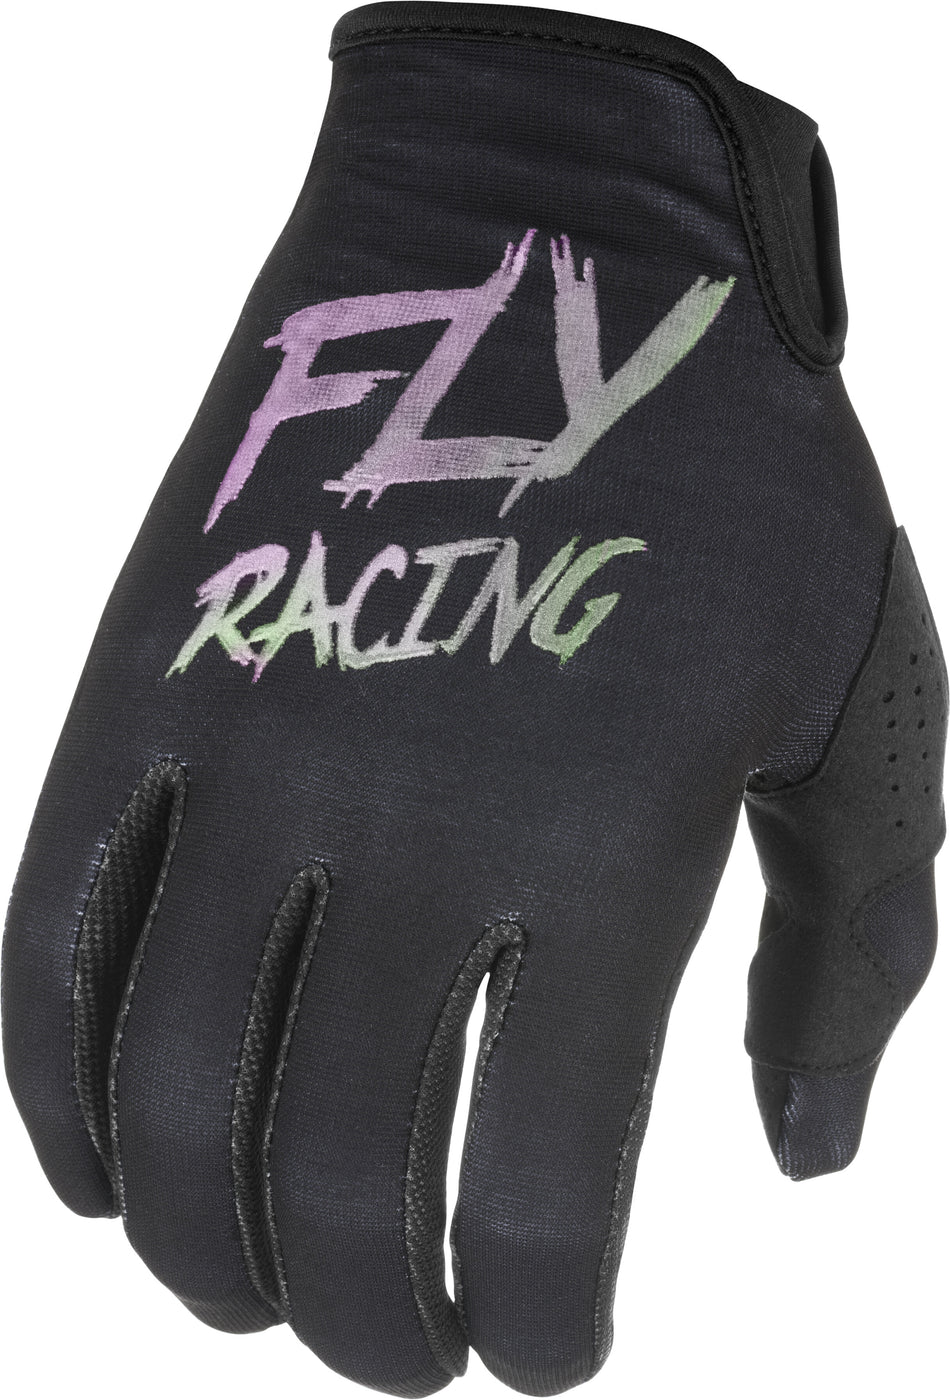 FLY RACING Youth Lite S.E. Gloves Black/Fusion Sz 04 374-71804